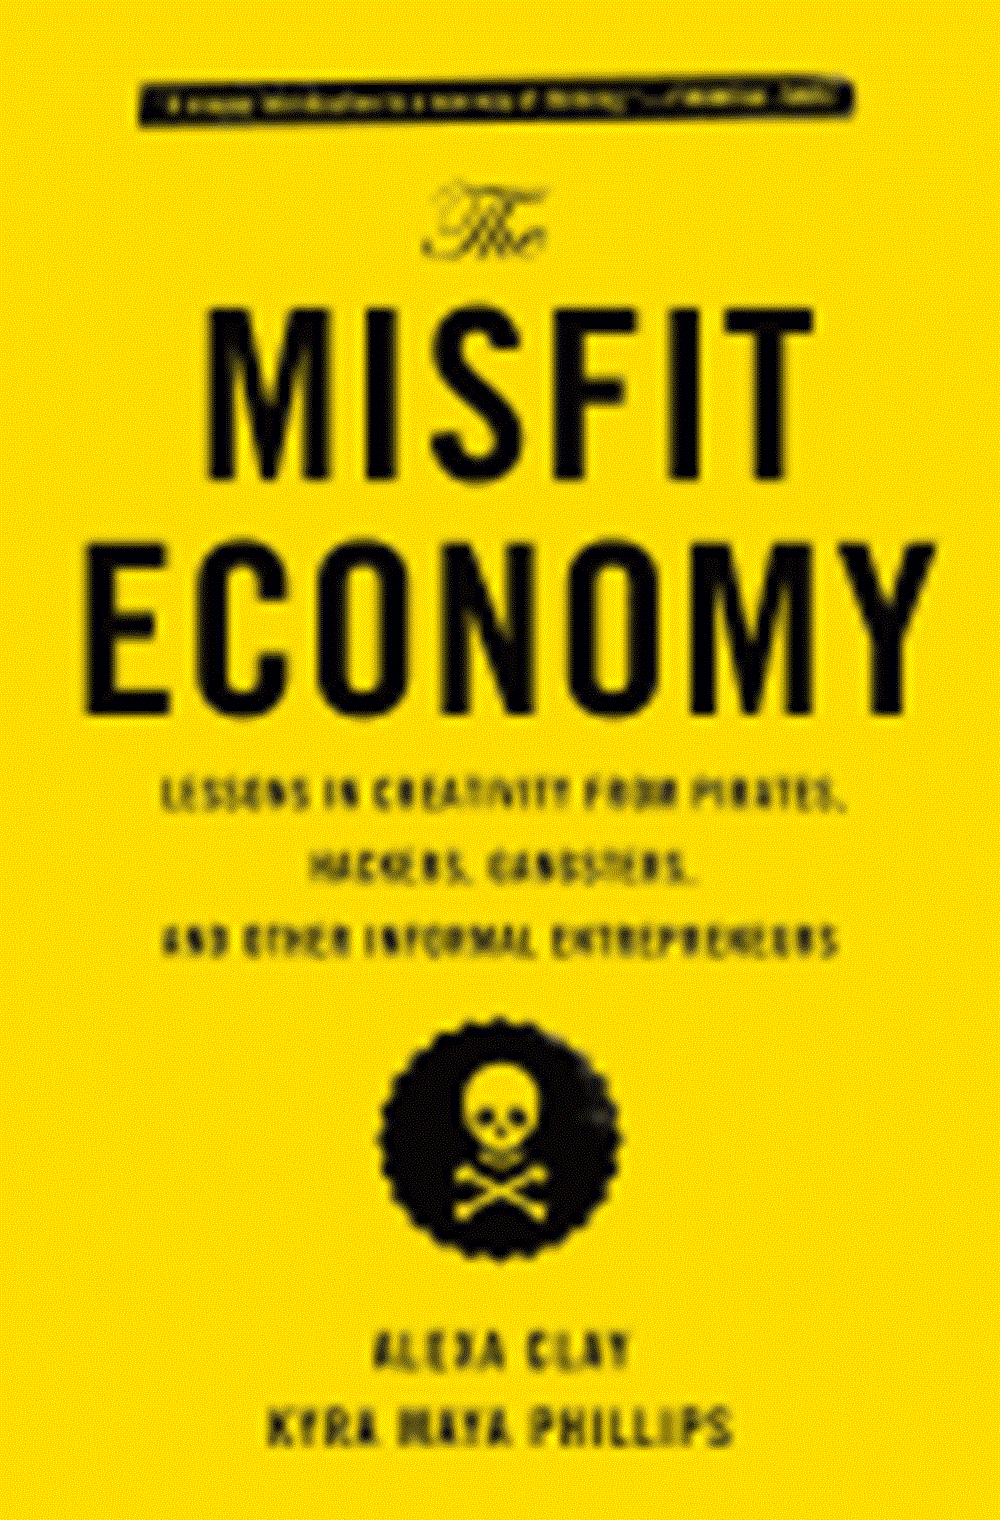 Misfit Economy: Lessons in Creativity from Pirates, Hackers, Gangsters and Other Informal Entreprene